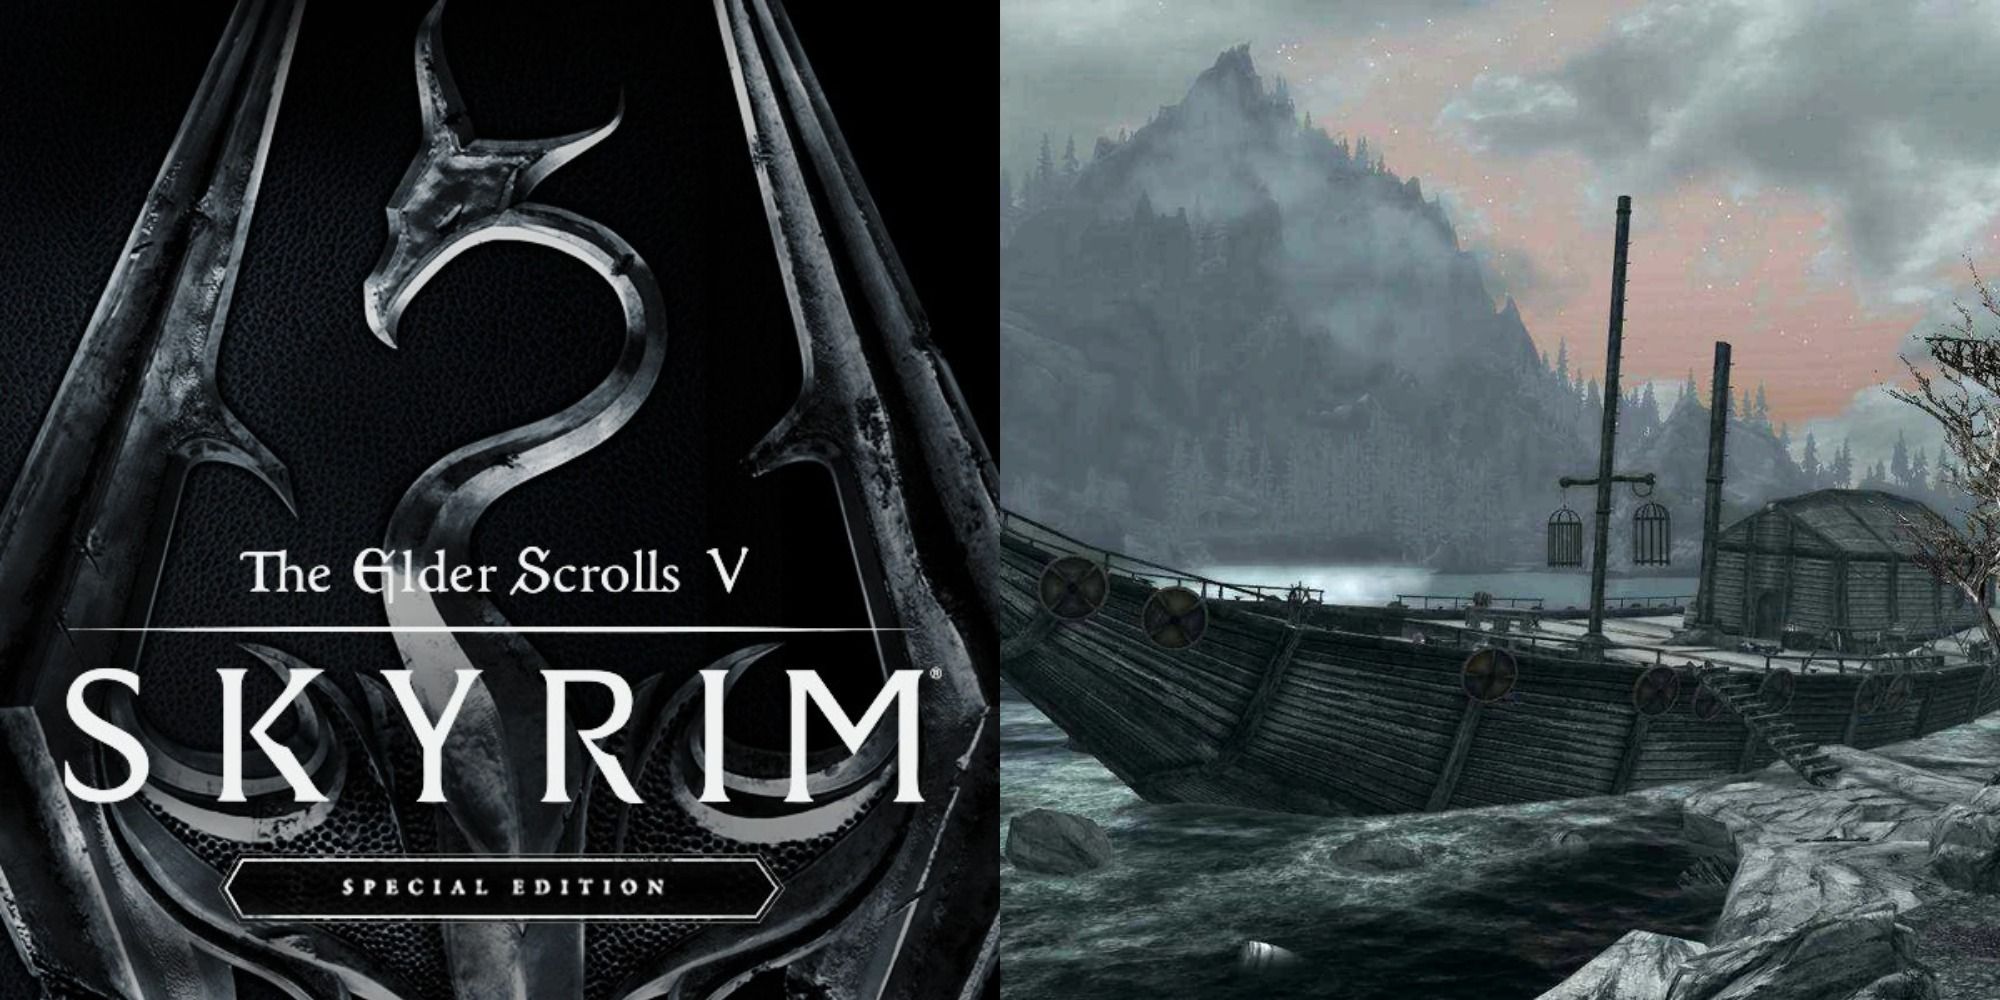 Split image showing the cover to Skyrim and a shipwreck